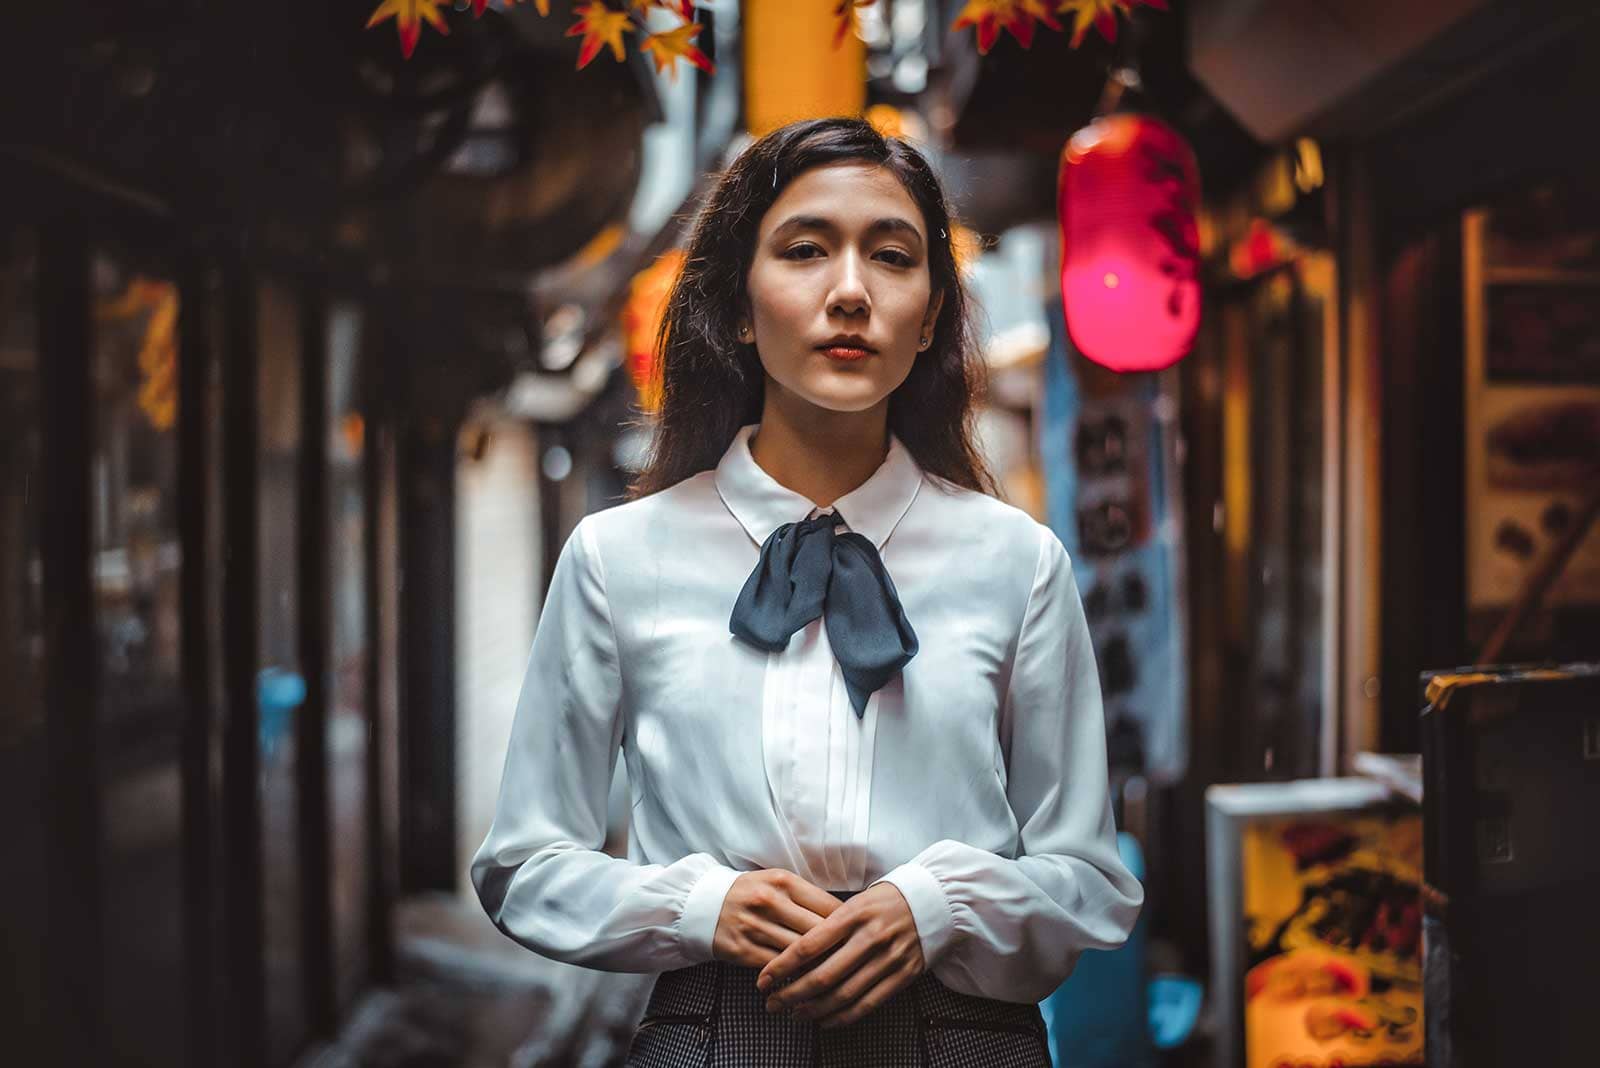 Portrait of a woman in Japanese town after editing using Lightroom portrait preset